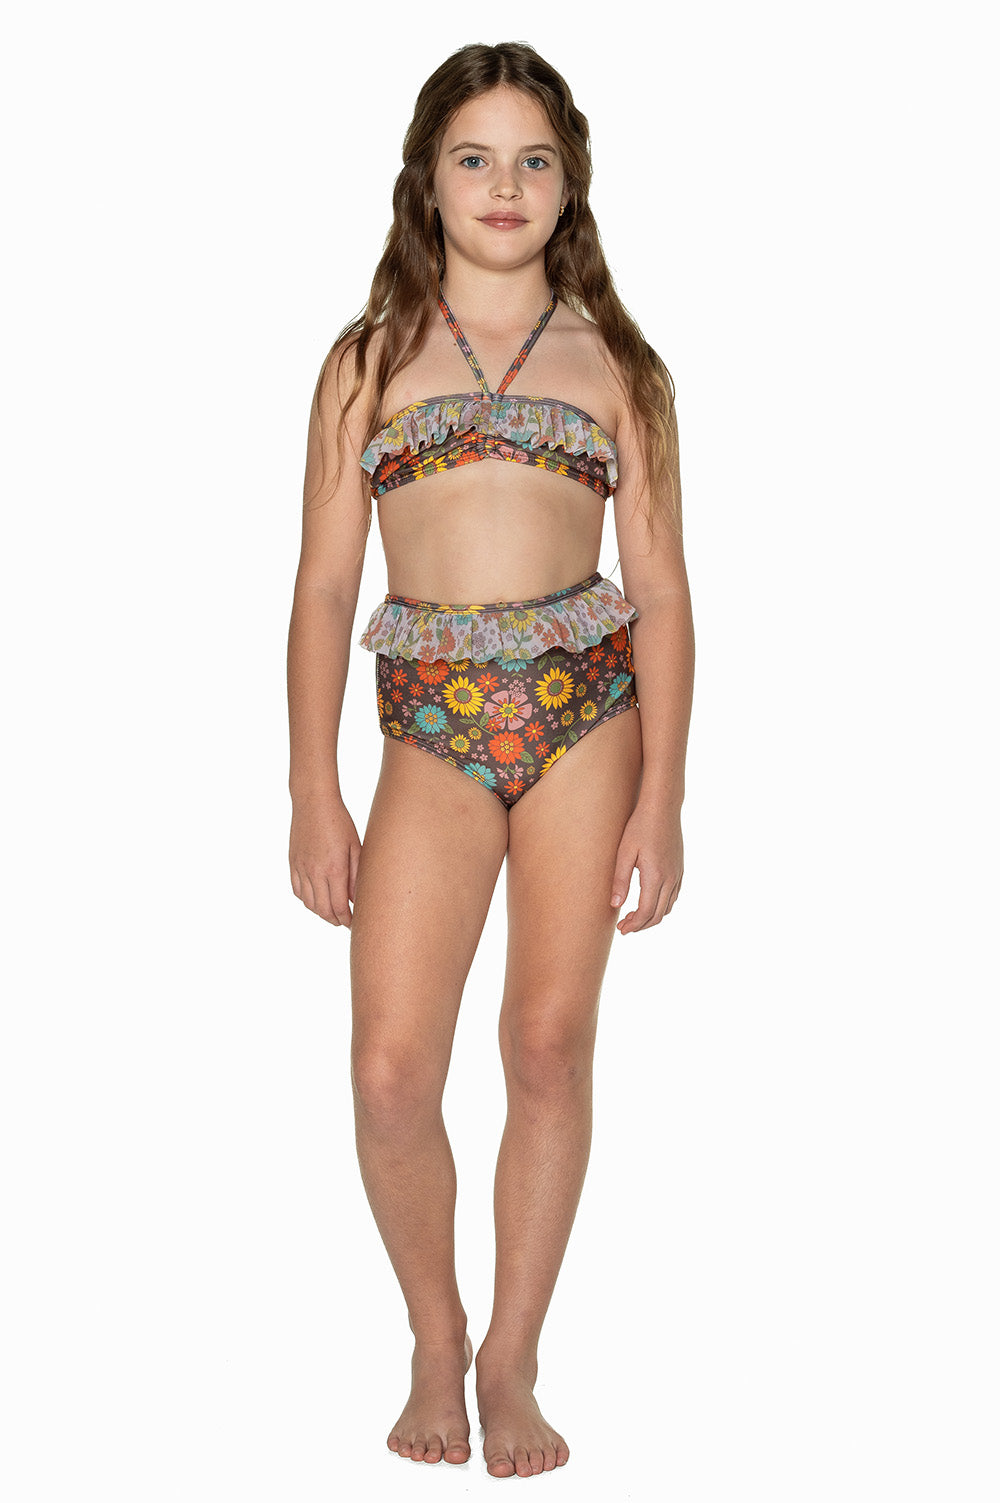 Girls High Waisted Bikini - Brown Floral - Poppy - Front